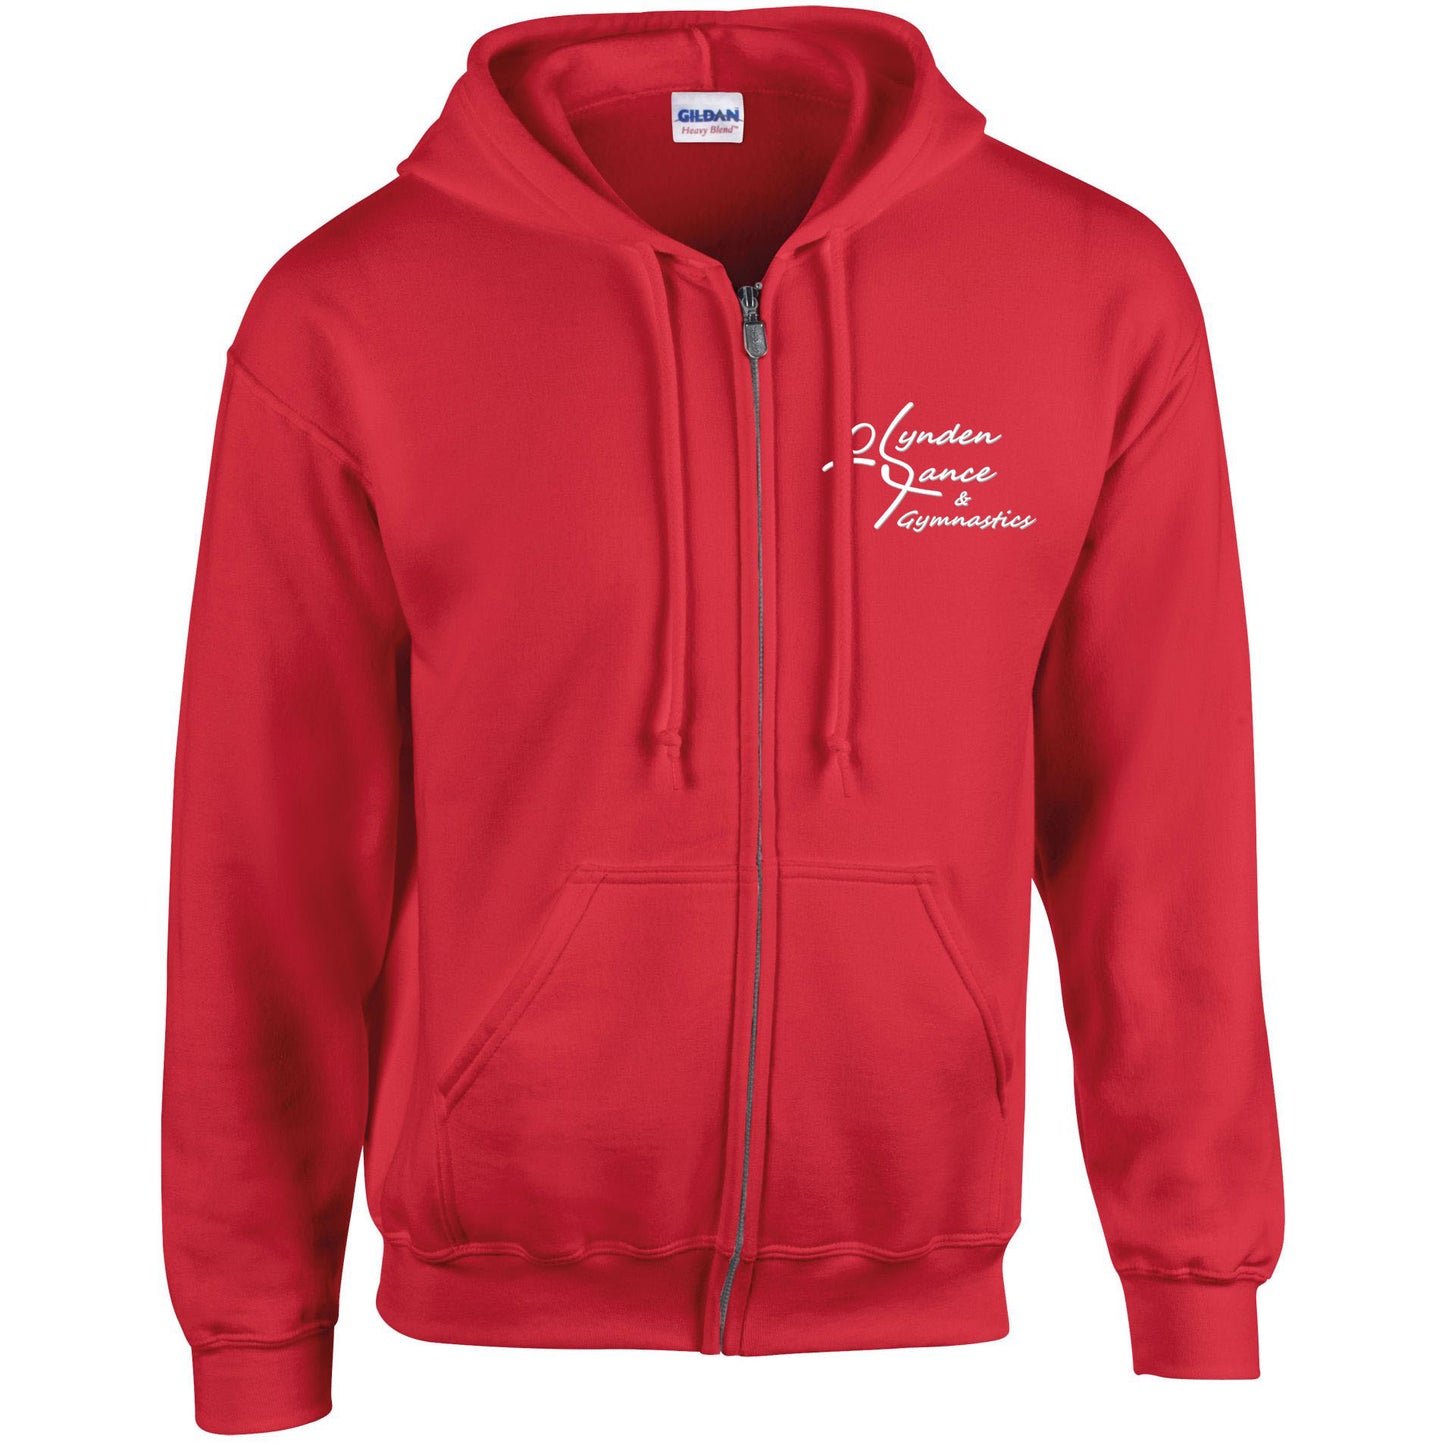 Uniform Hoodie, red with white Lynden logo